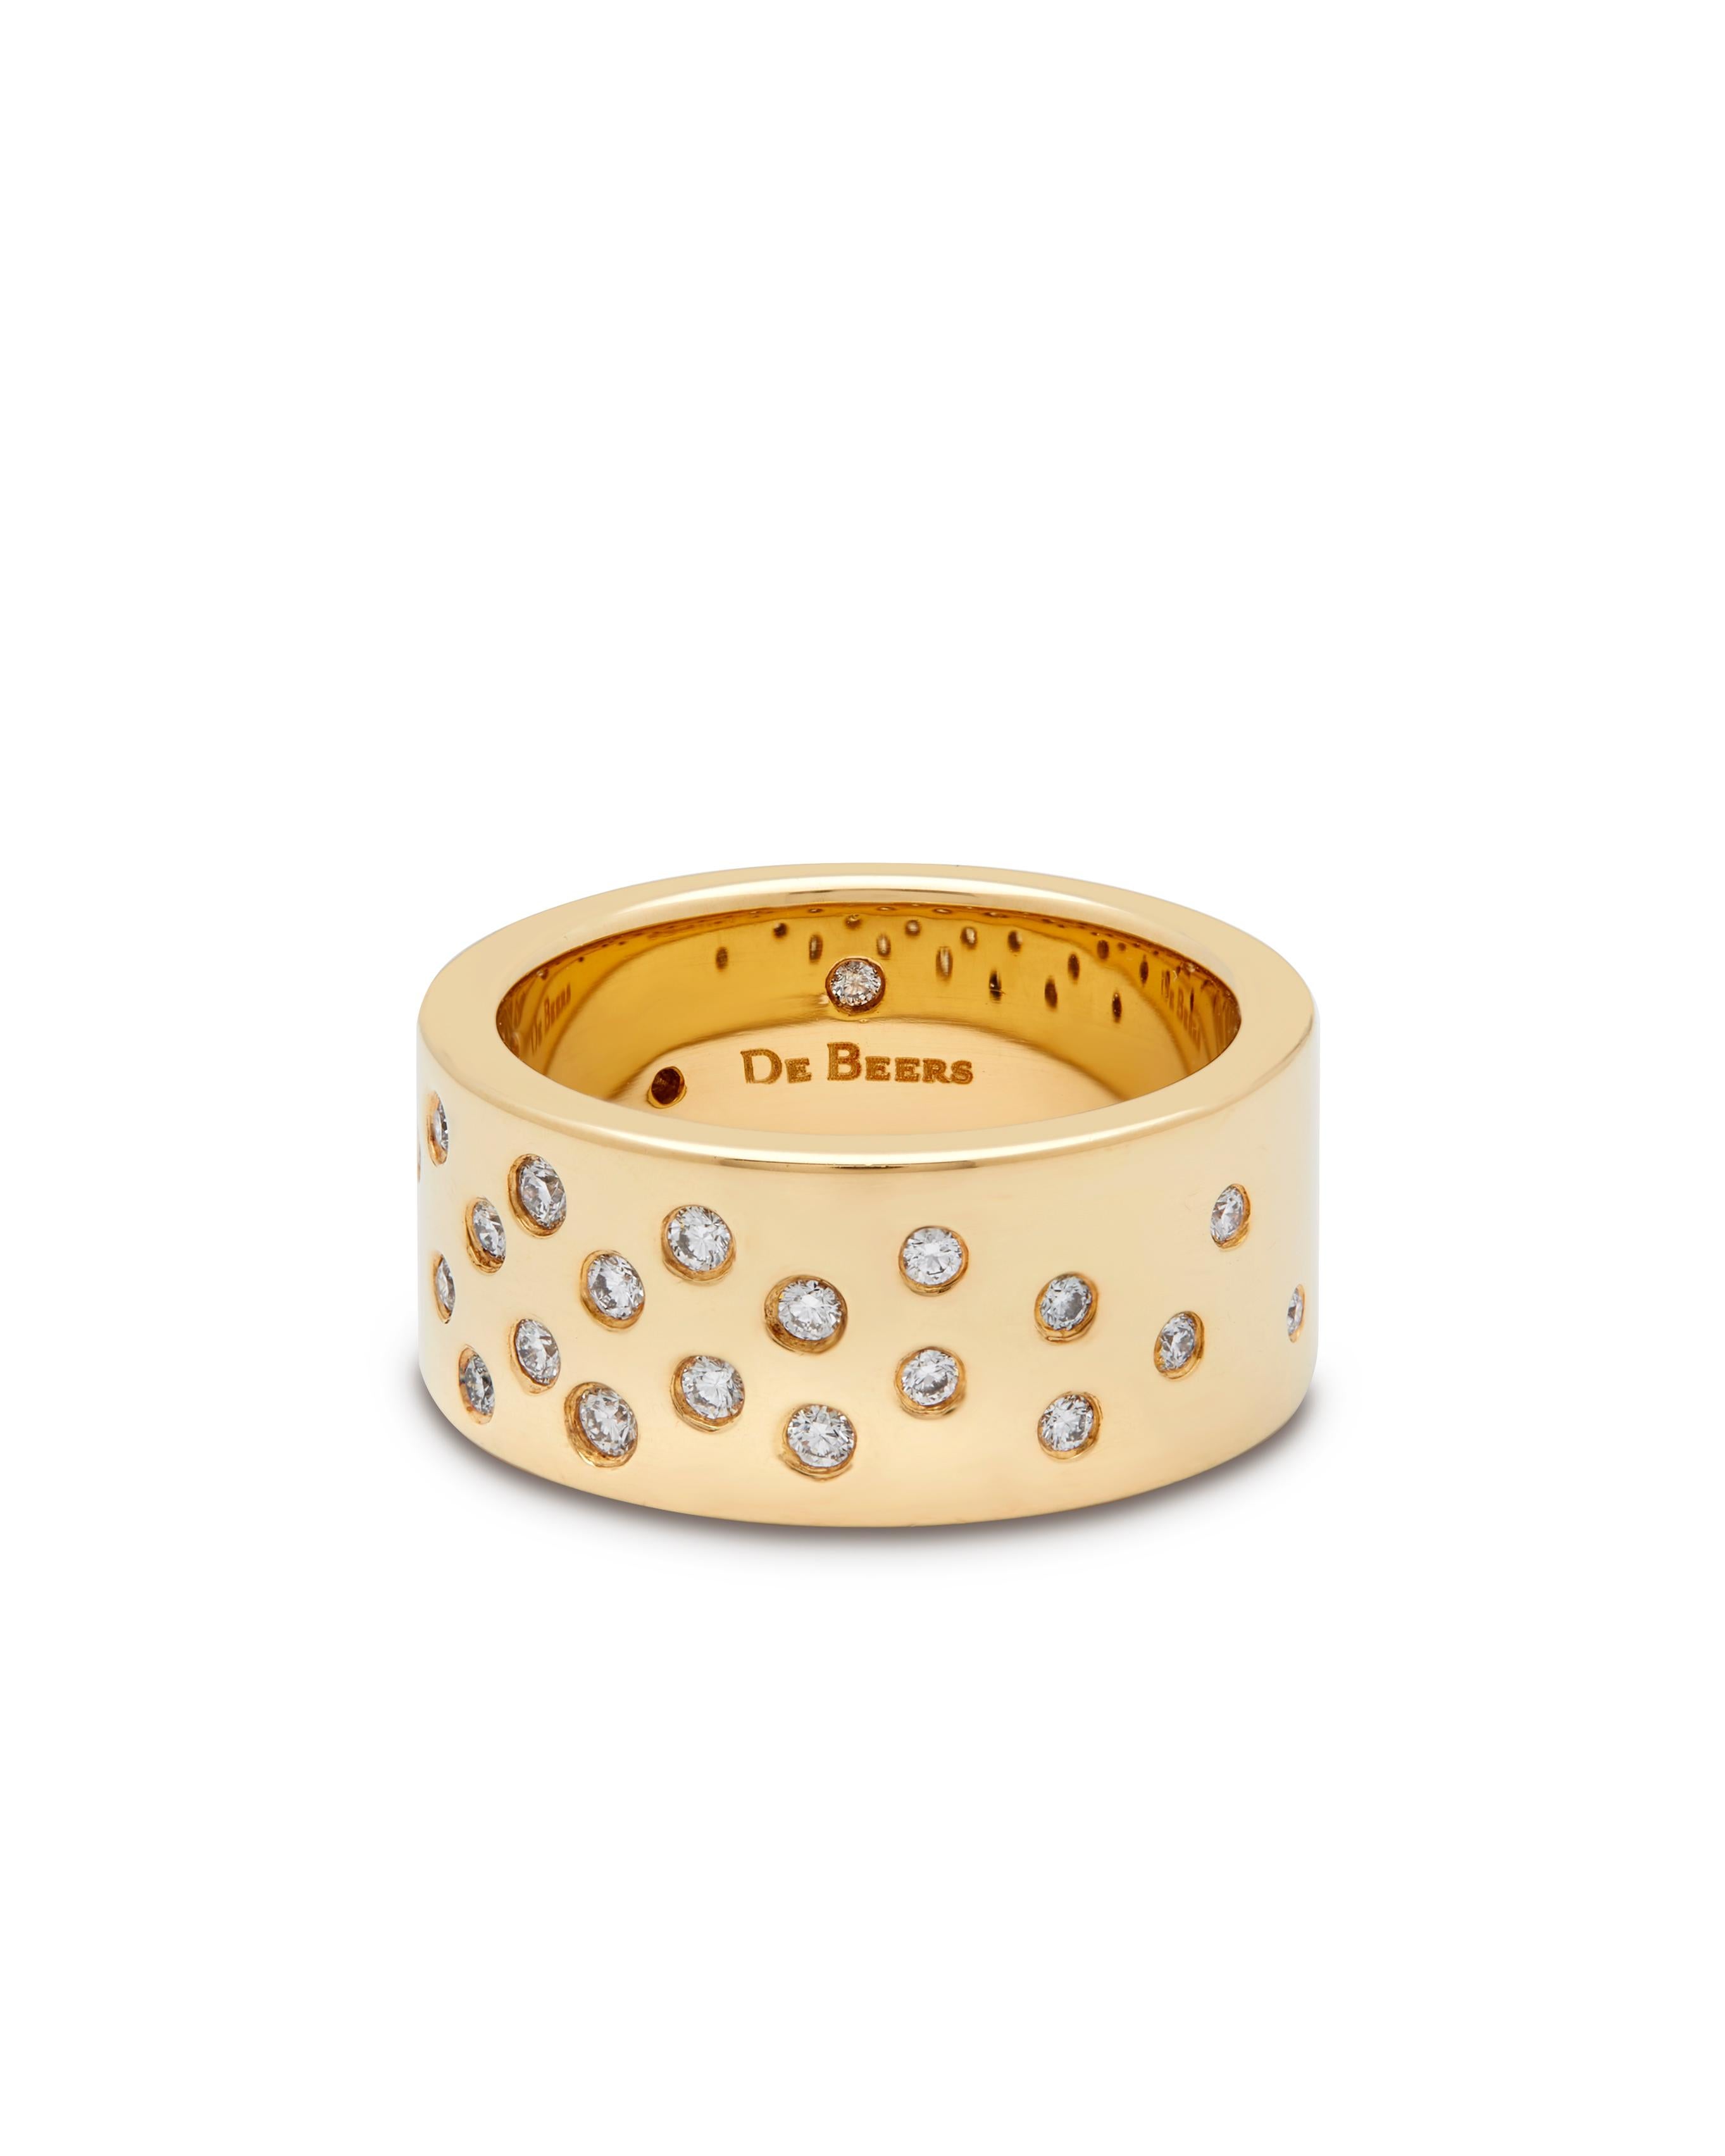 De Beers 18ct yellow gold diamond band ring.

The ring is sprinkled with 26 round brilliant cut diamonds rub-over set throughout, with 1 hidden on the inside of the band, with an approximate total weight of 0.47ct, F-G colour and VS clarity. 
The